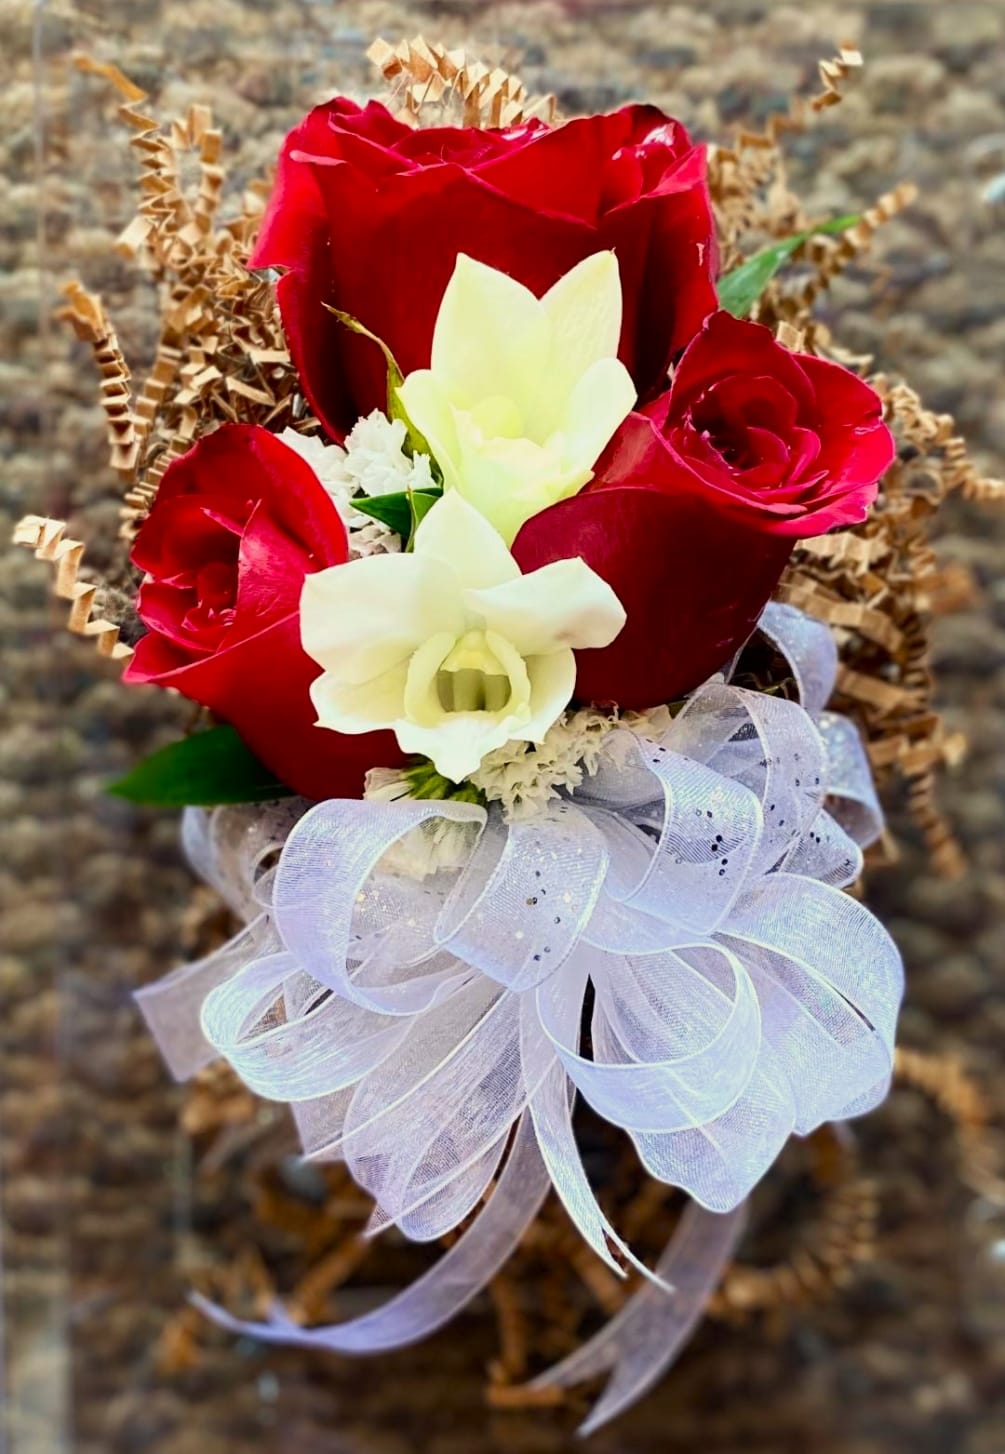 This classic pin corsage is composed of three Red Roses, Dendrobium orchids